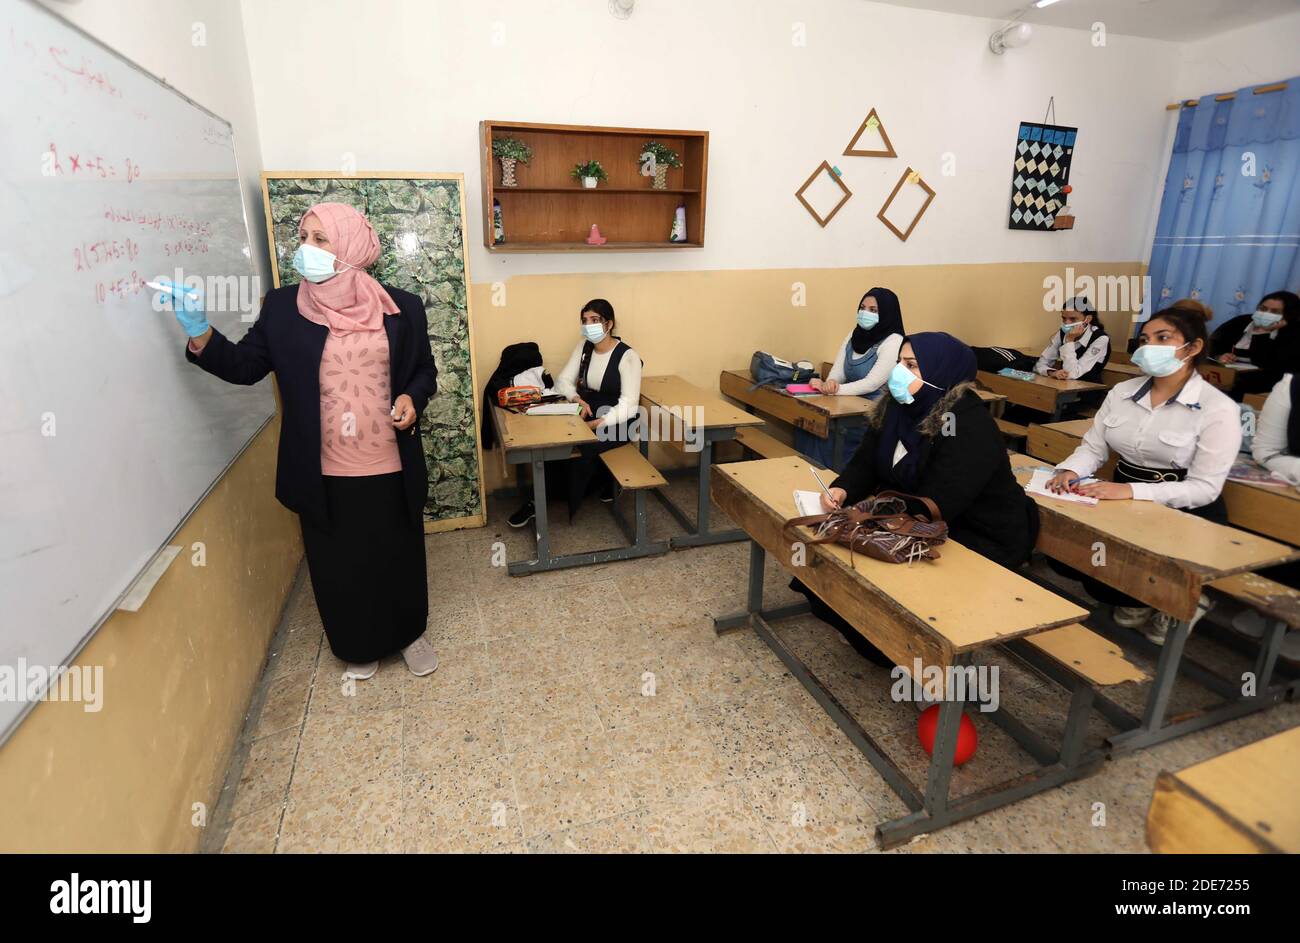 Baghdad. 29th Nov, 2020. Students attend a lecture at a school in Baghdad, Iraq, on Nov. 29, 2020. The Iraqi Health Ministry reported on Sunday 1,614 new COVID-19 cases, bringing the nationwide infections to 550,435. New school year has started across Iraq on Nov. 29. Credit: Xinhua/Alamy Live News Stock Photo